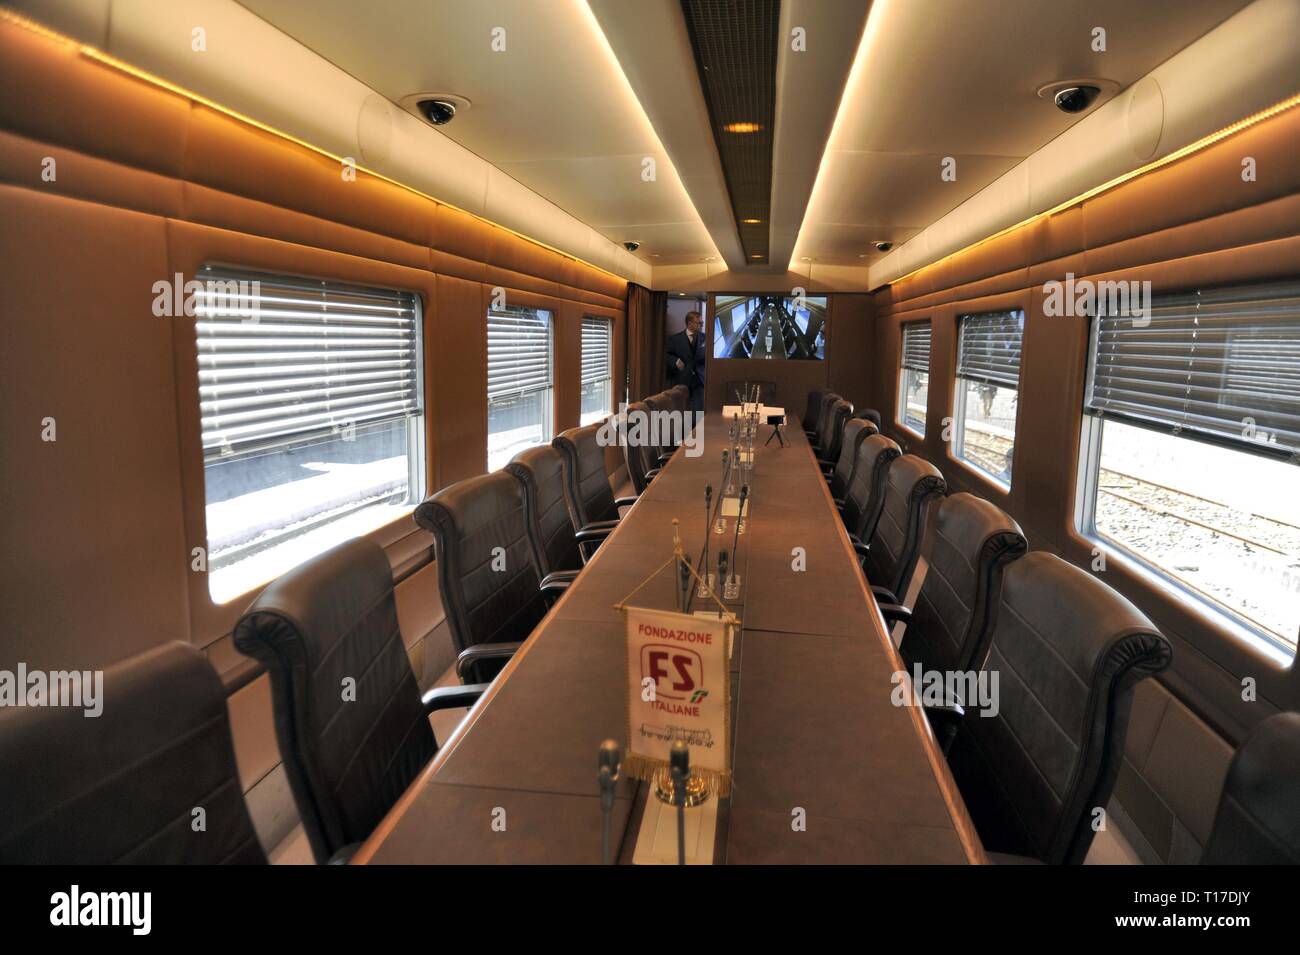 Fondazione FS Italiane, open day at the workshops of the Squadra Rialzo of Milano Centrale station, where historical trains are preserved and restored, on the occasion of the FAI Spring Days. Luxurious interior of the Press & Conference car Stock Photo